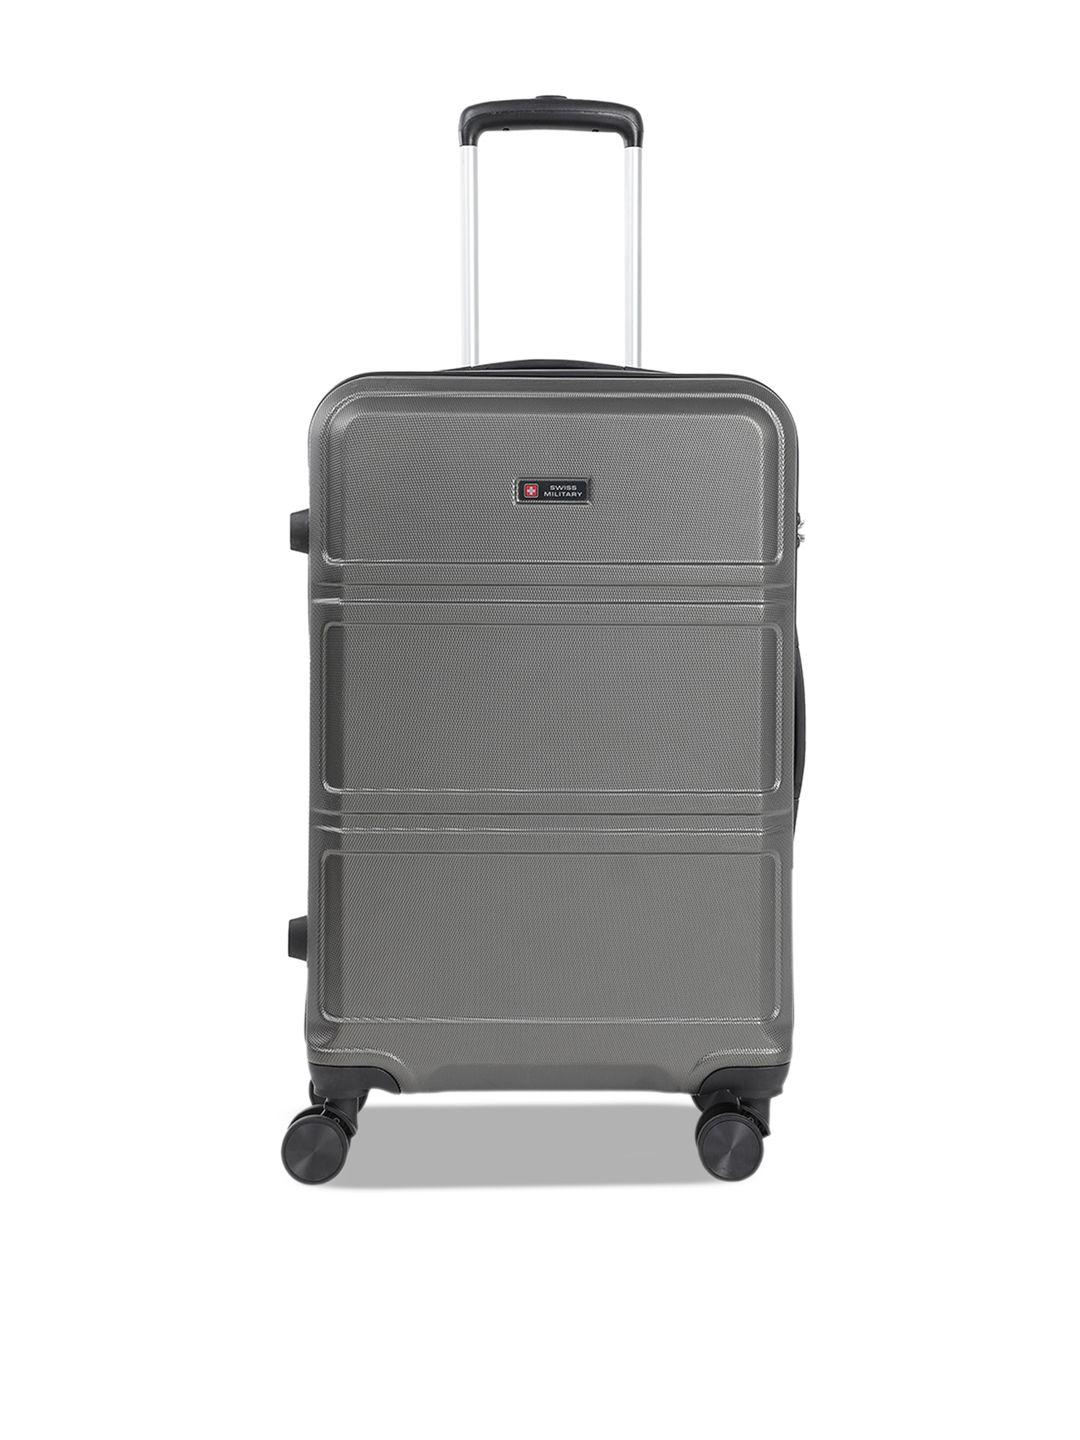 swiss military textured hard-sided small trolley suitcase